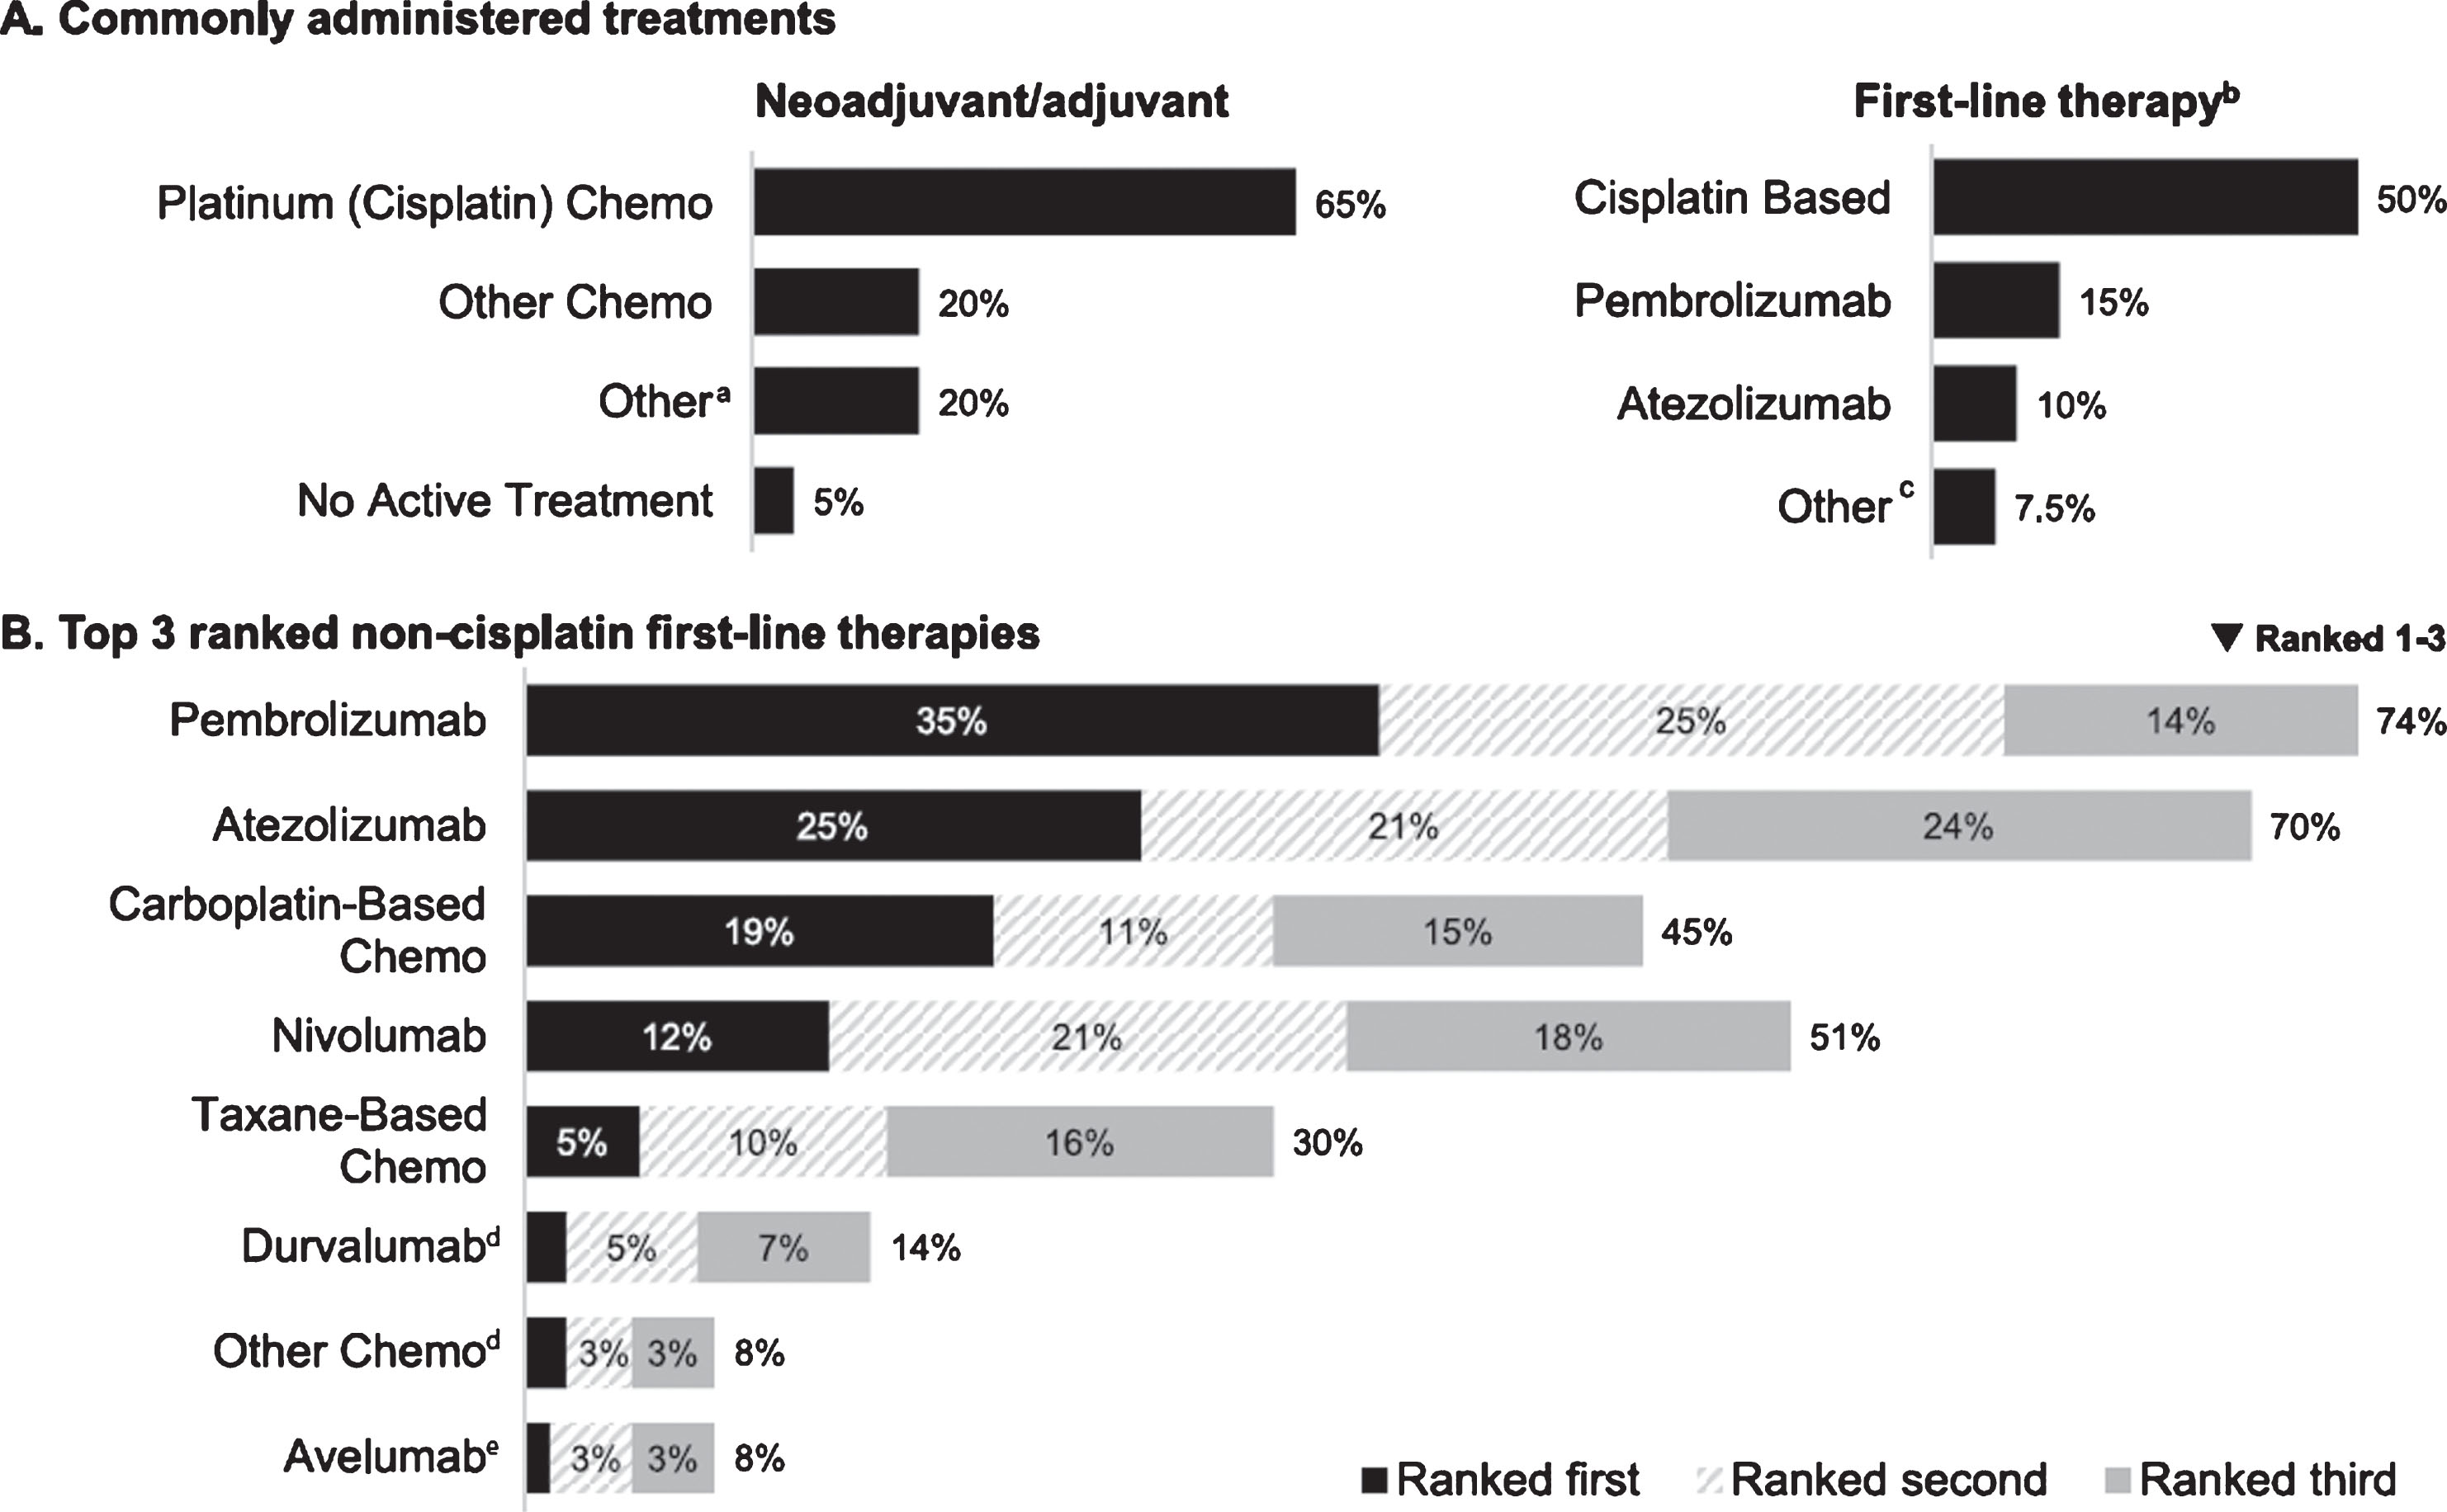 Reported treatment patterns (n = 301). (A) Commonly administered treatments (median percentage of patients receiving treatment in indicated setting). (B). Top 3 ranked non-cisplatin first-line therapies (percentage of respondents). Chemo, chemotherapy. aCancer immunotherapy/immunotherapy (n = 9) and Bacillus Calmette-Guérin, carboplatin, clinical trial, radiotherapy, sparing (n = 1 each). bNivolumab and other chemo (less than 1% each) not plotted. cAvelumab and clinical trial (n = 1 each). dRanked first by 2%. eRanked first by 1%.